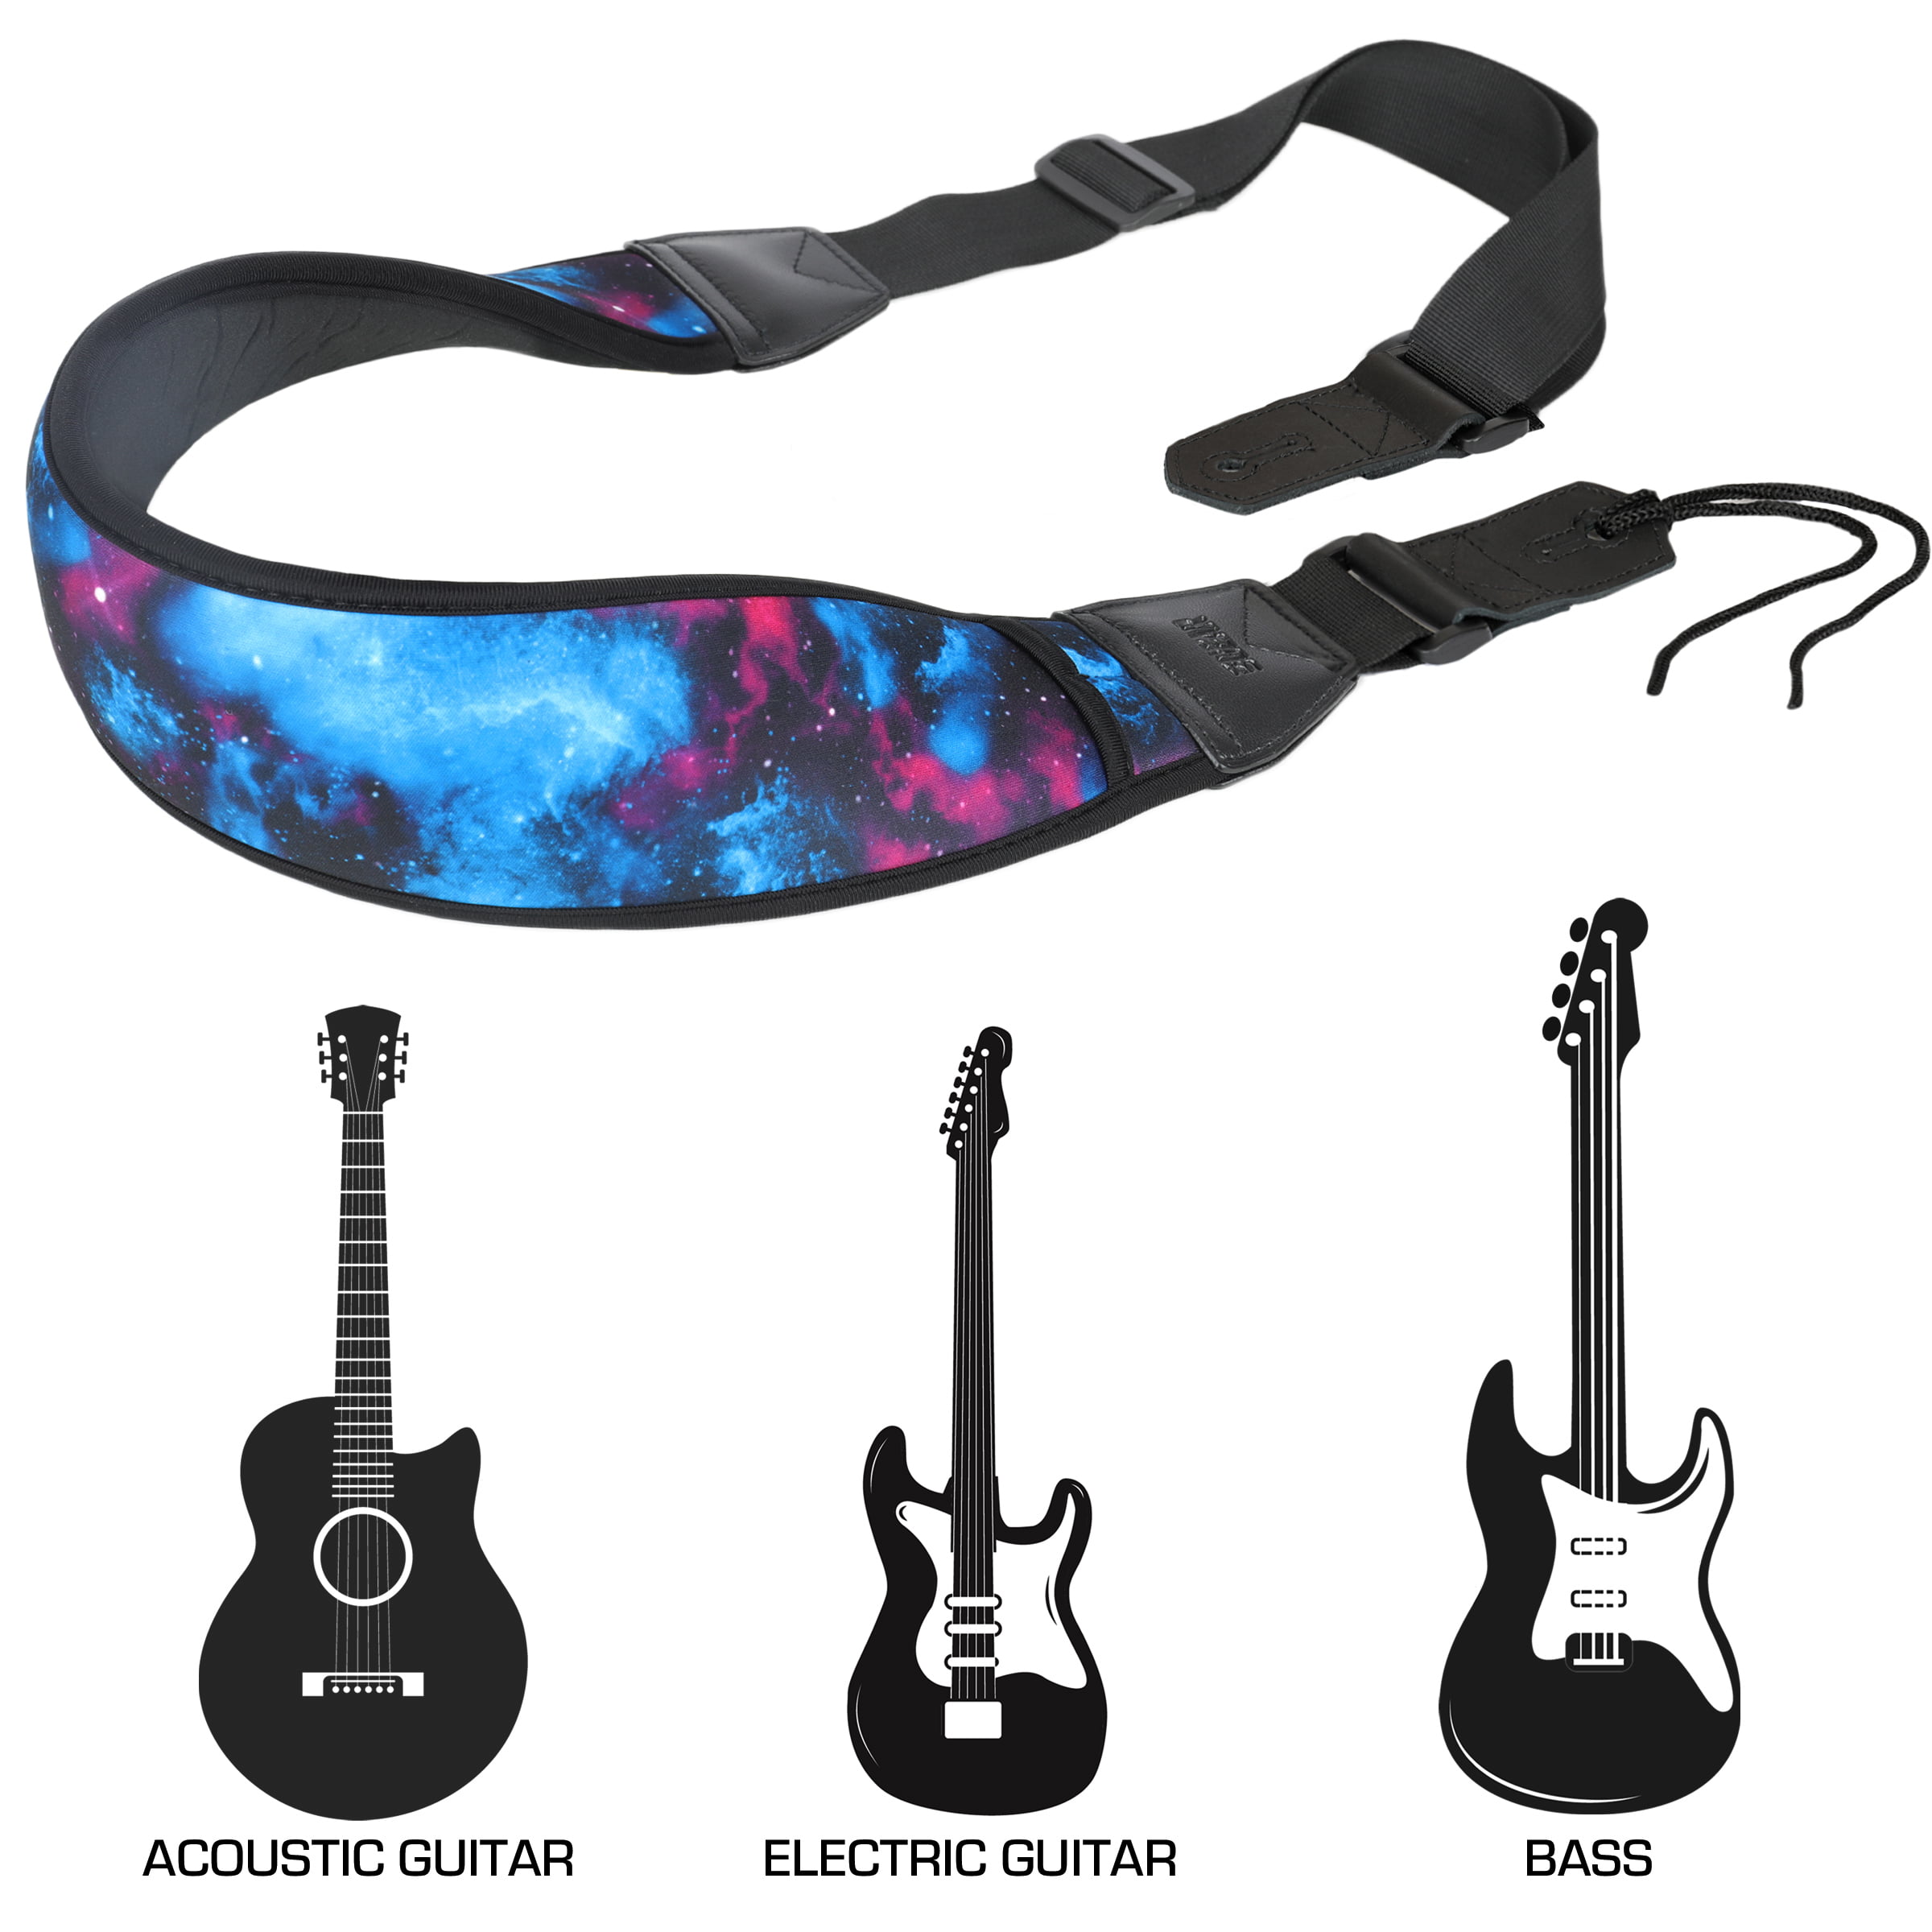 GOKKO AUDIO Guitar Strap Adjustable Printed Flame Soft Nylon Leather End for Electric Acoustic Guitar Bass 